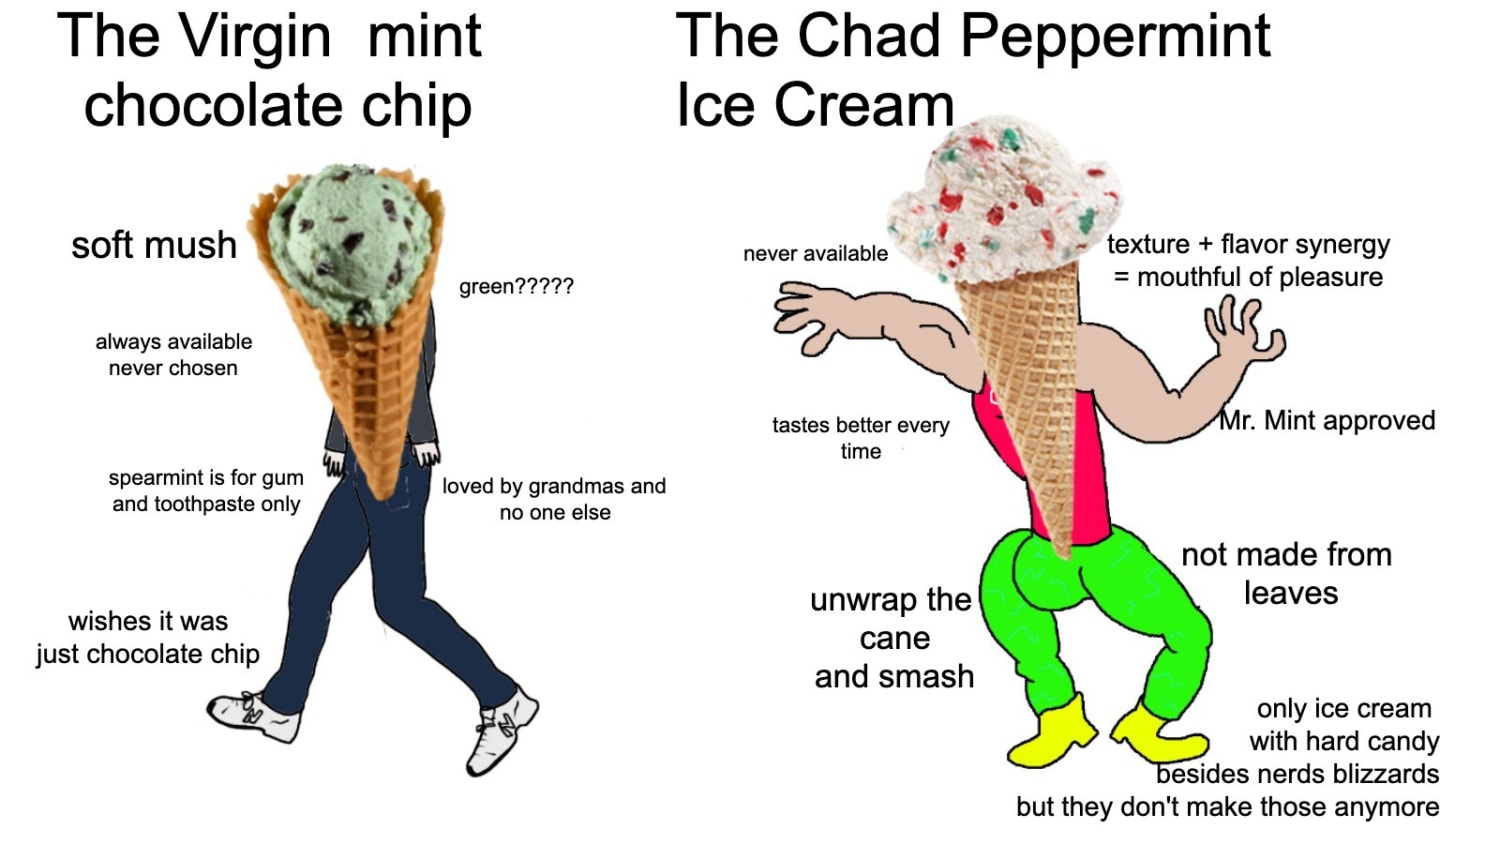 Peppermint Ice Cream Is Superior to Mint Chocolate Chip, That Vile Green Garbage